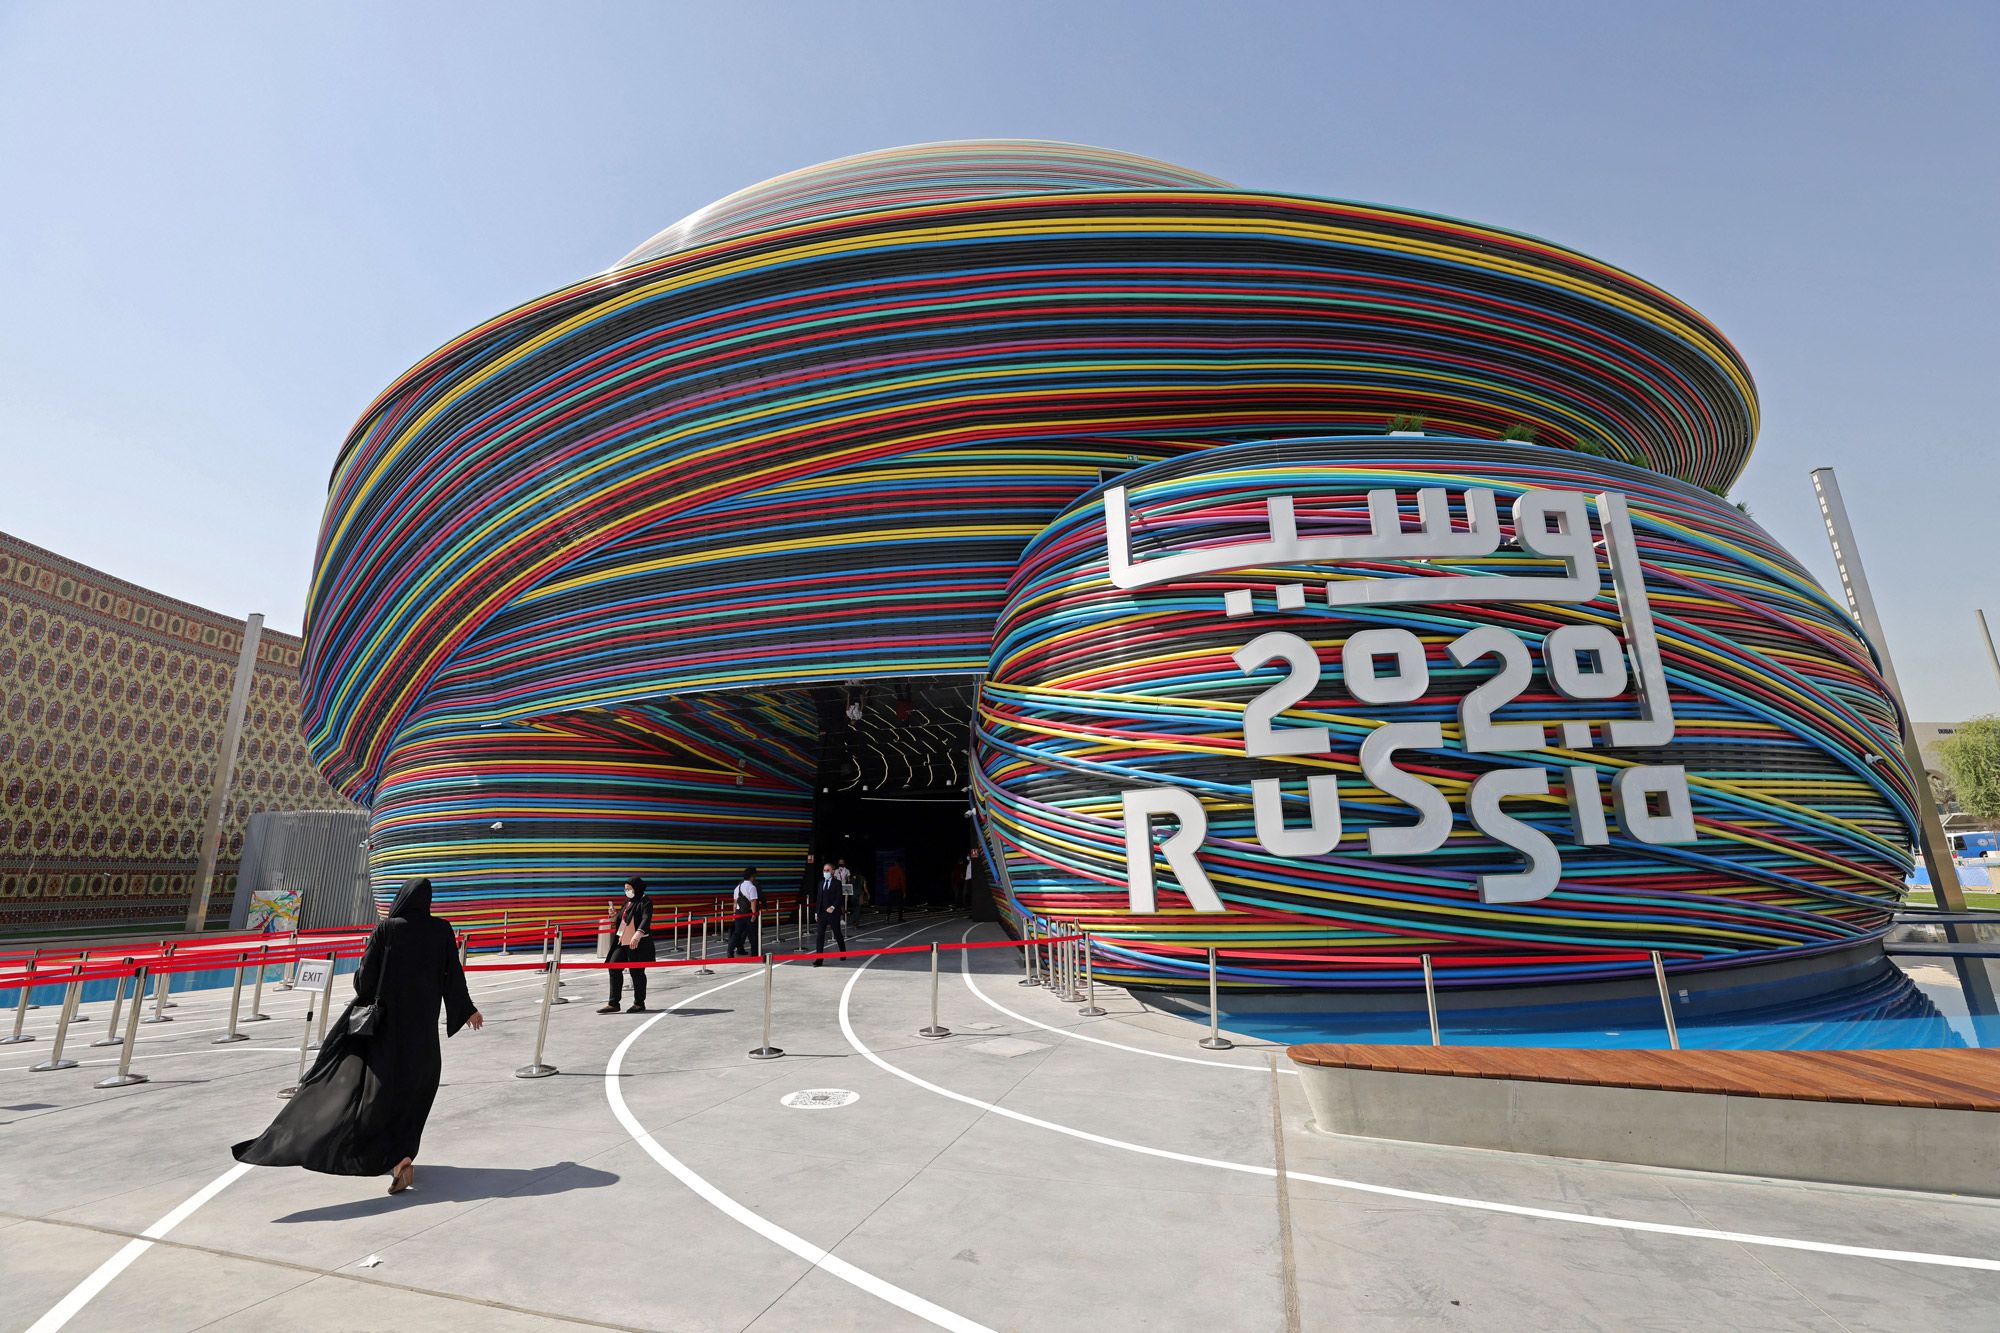 The most spectacular pavilions at Expo 2020 Dubai